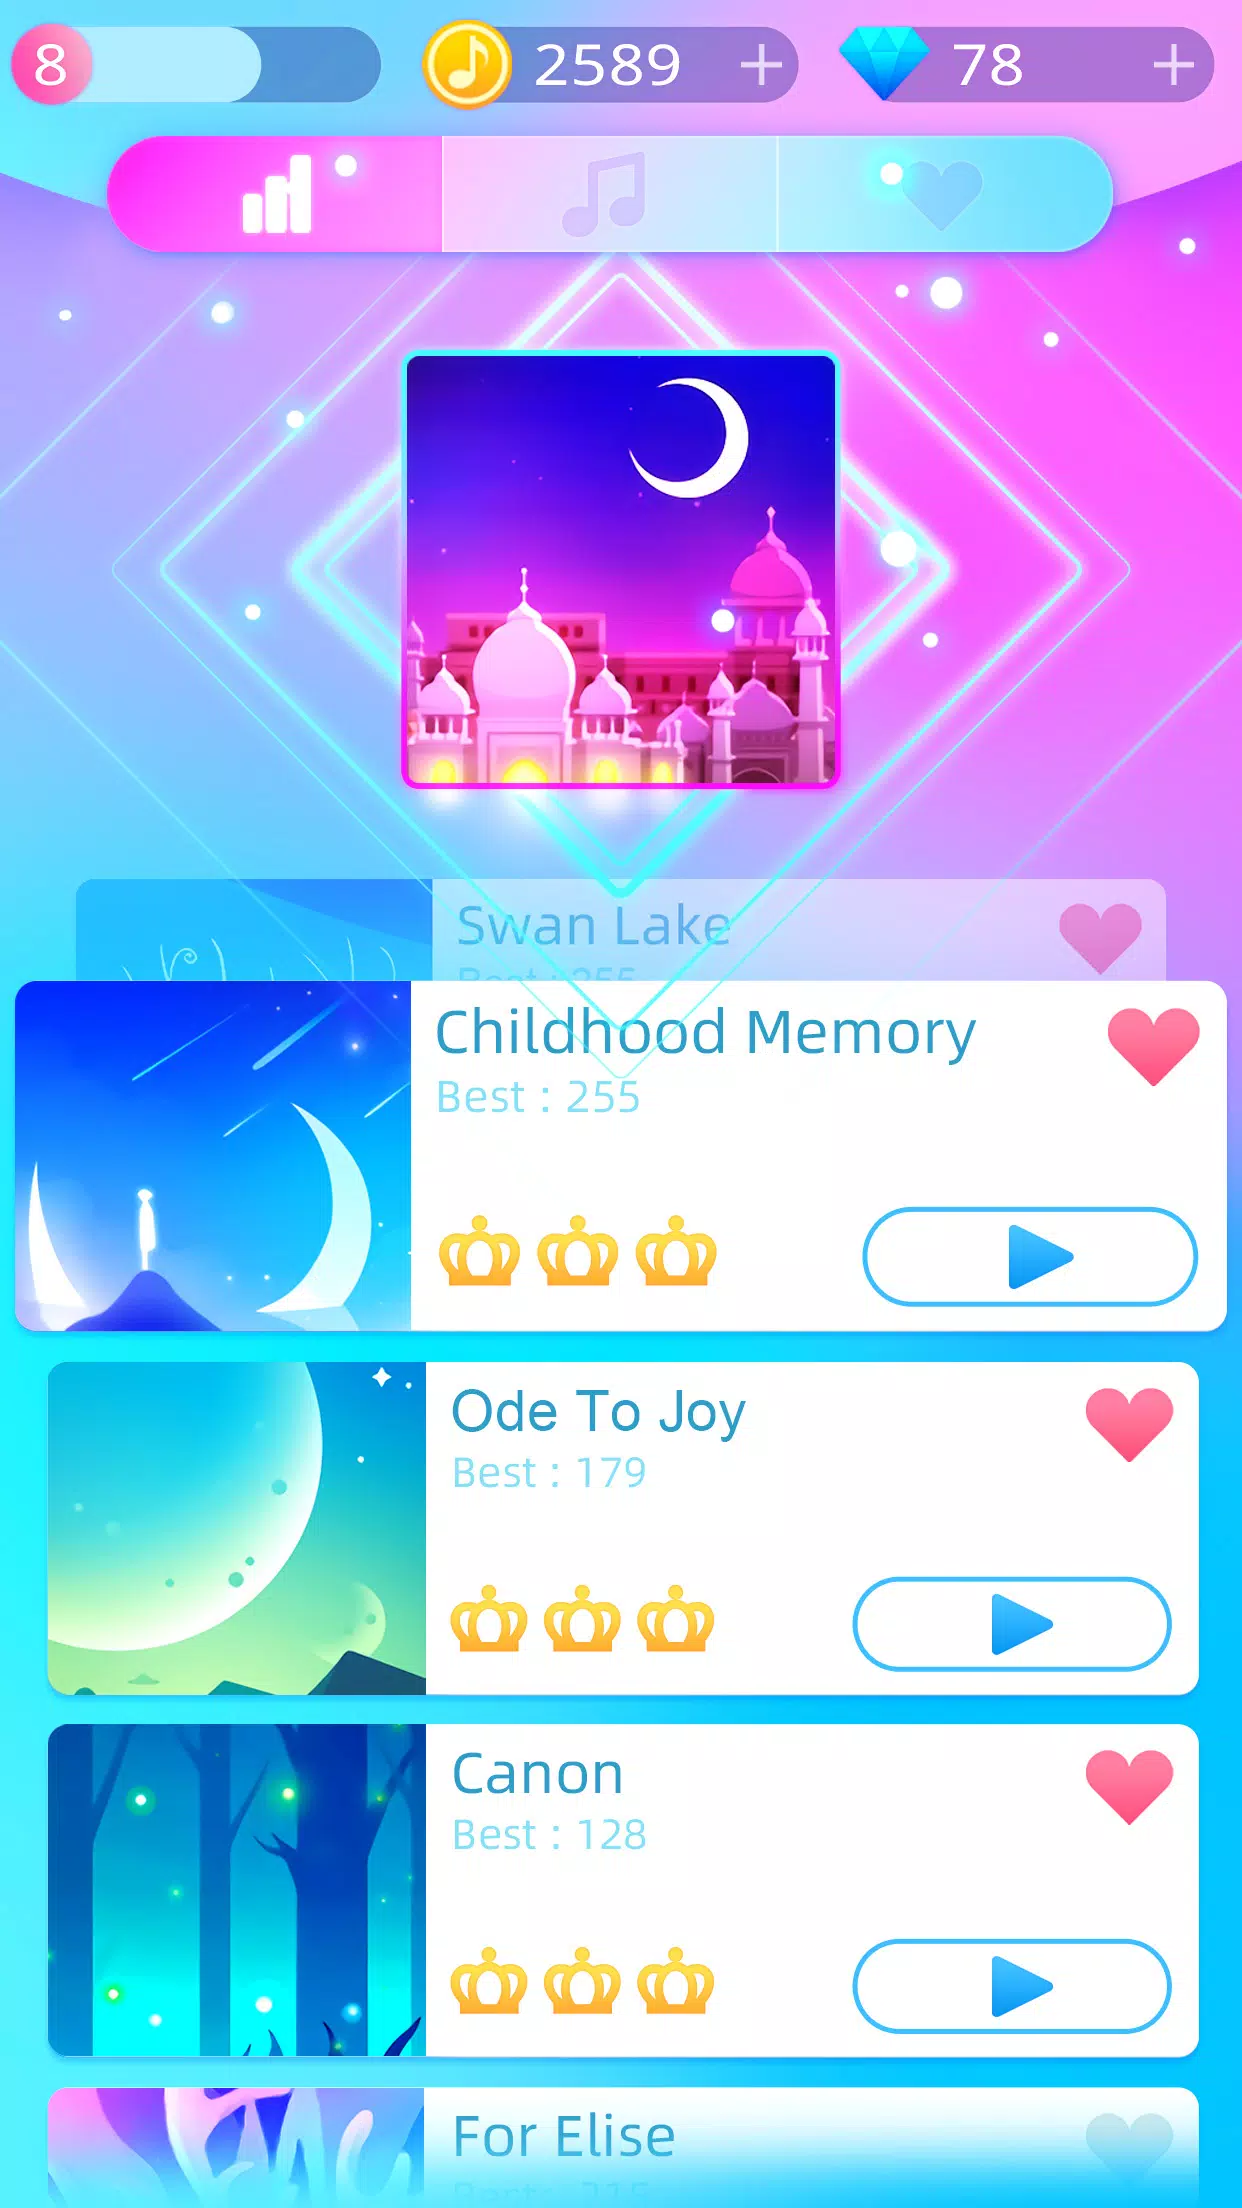 2022 Fun Piano Music Game with Edm Songs! Tap tiles non-stop